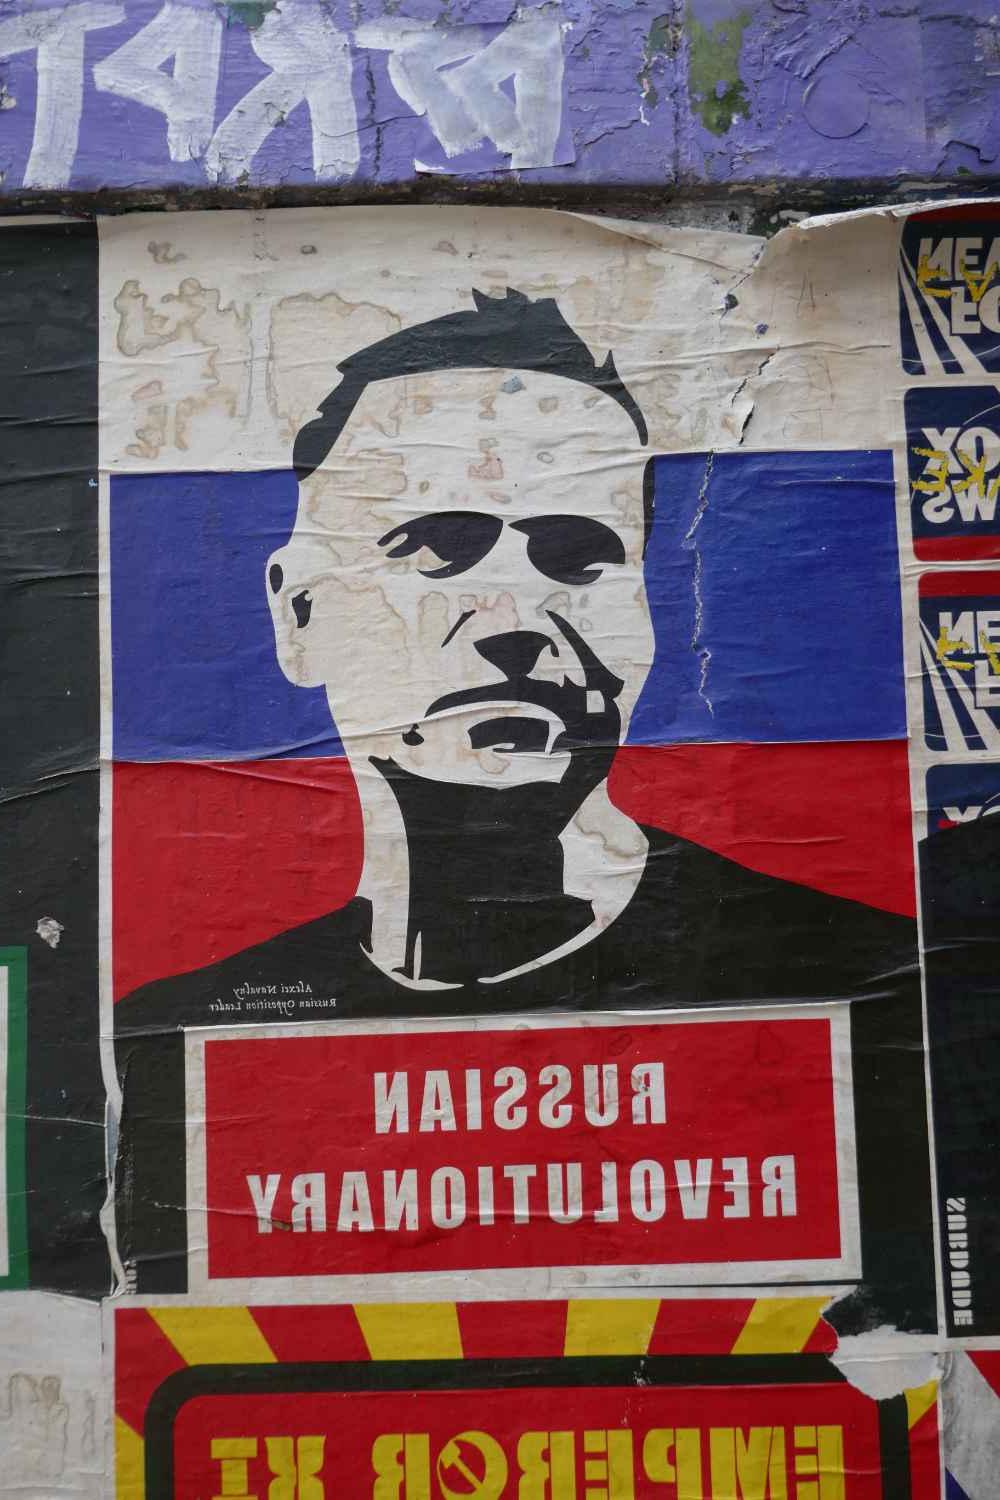 Street art featuring a black and white rendering of Alexei Navalny in front of a Russian flag and with the words "Russian Revolutionary" underneath.